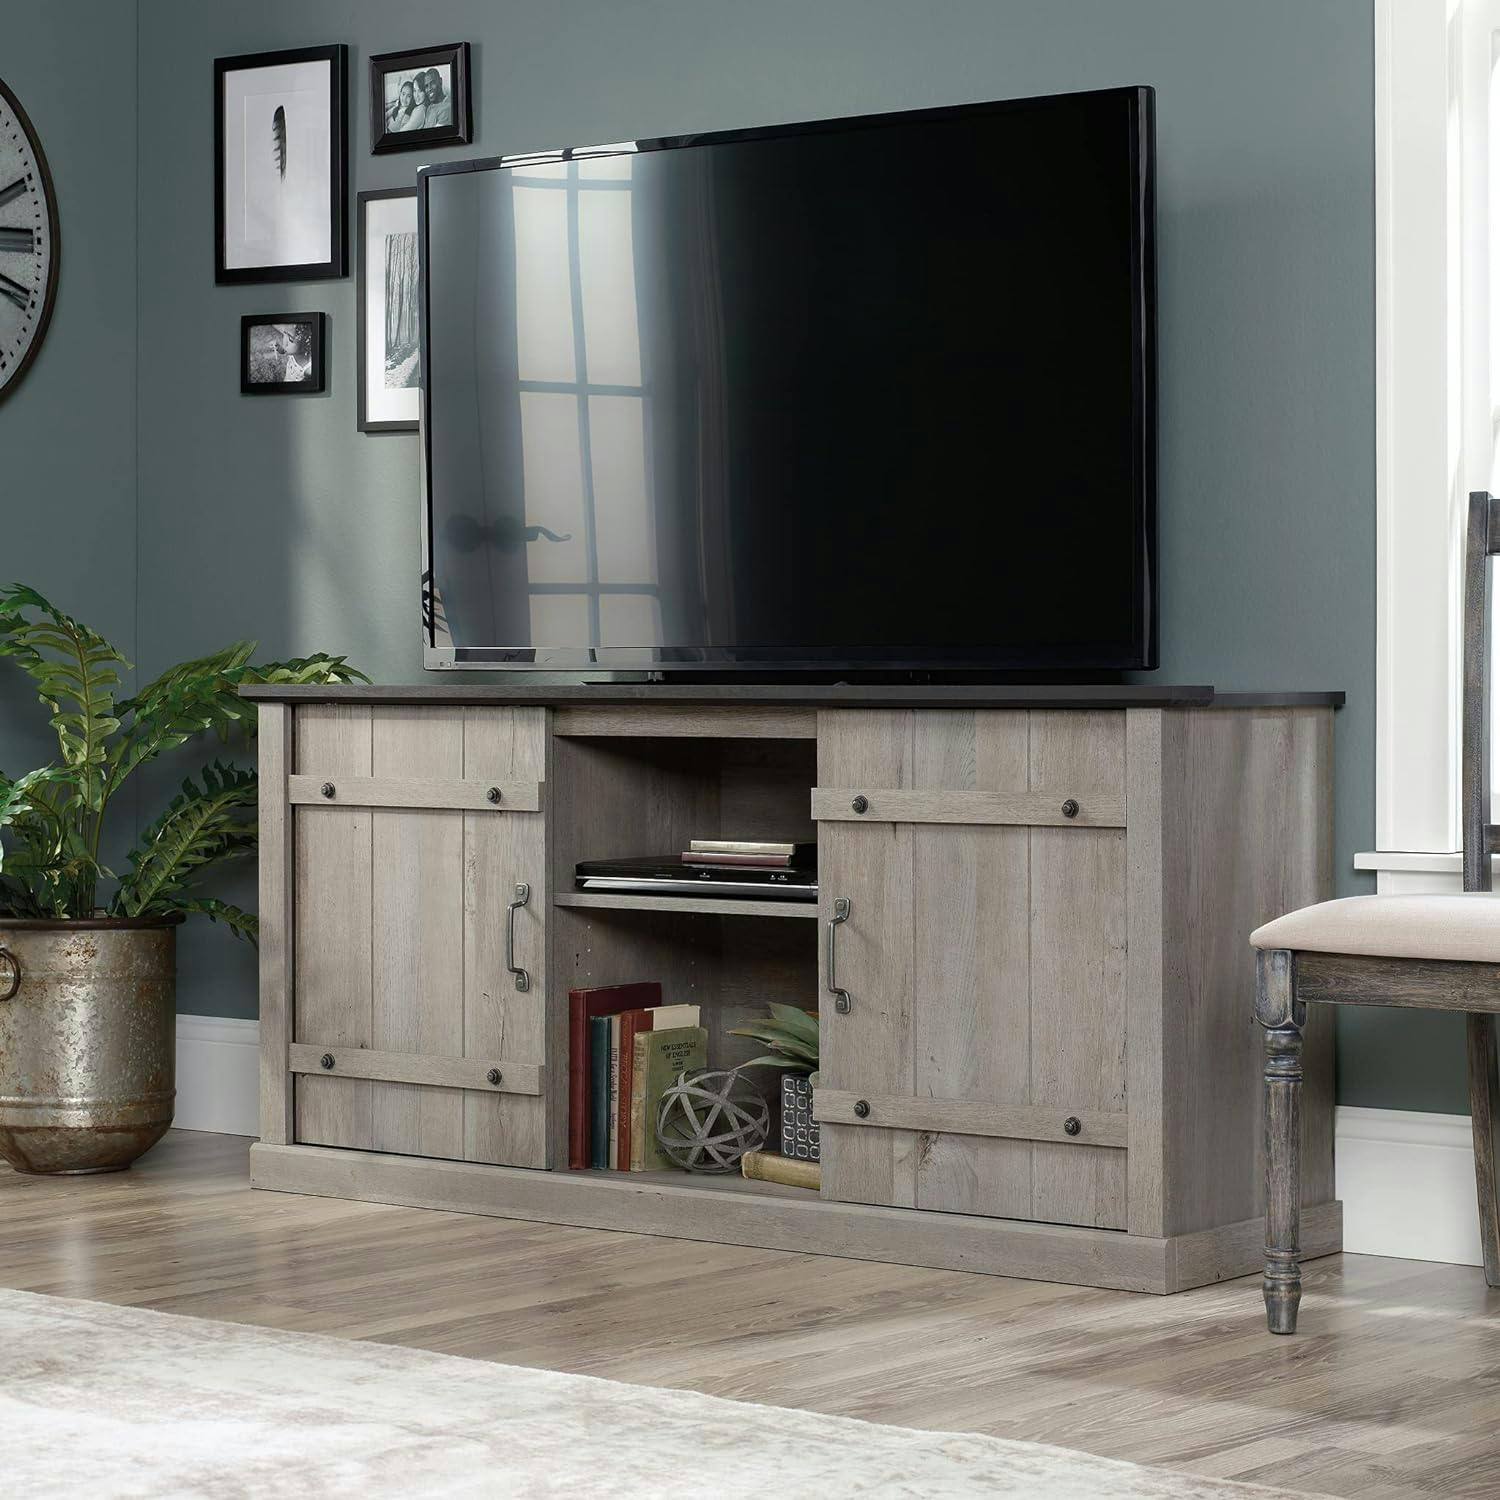 Mystic Oak and Raven Black 70" Farmhouse TV Stand with Barn Doors